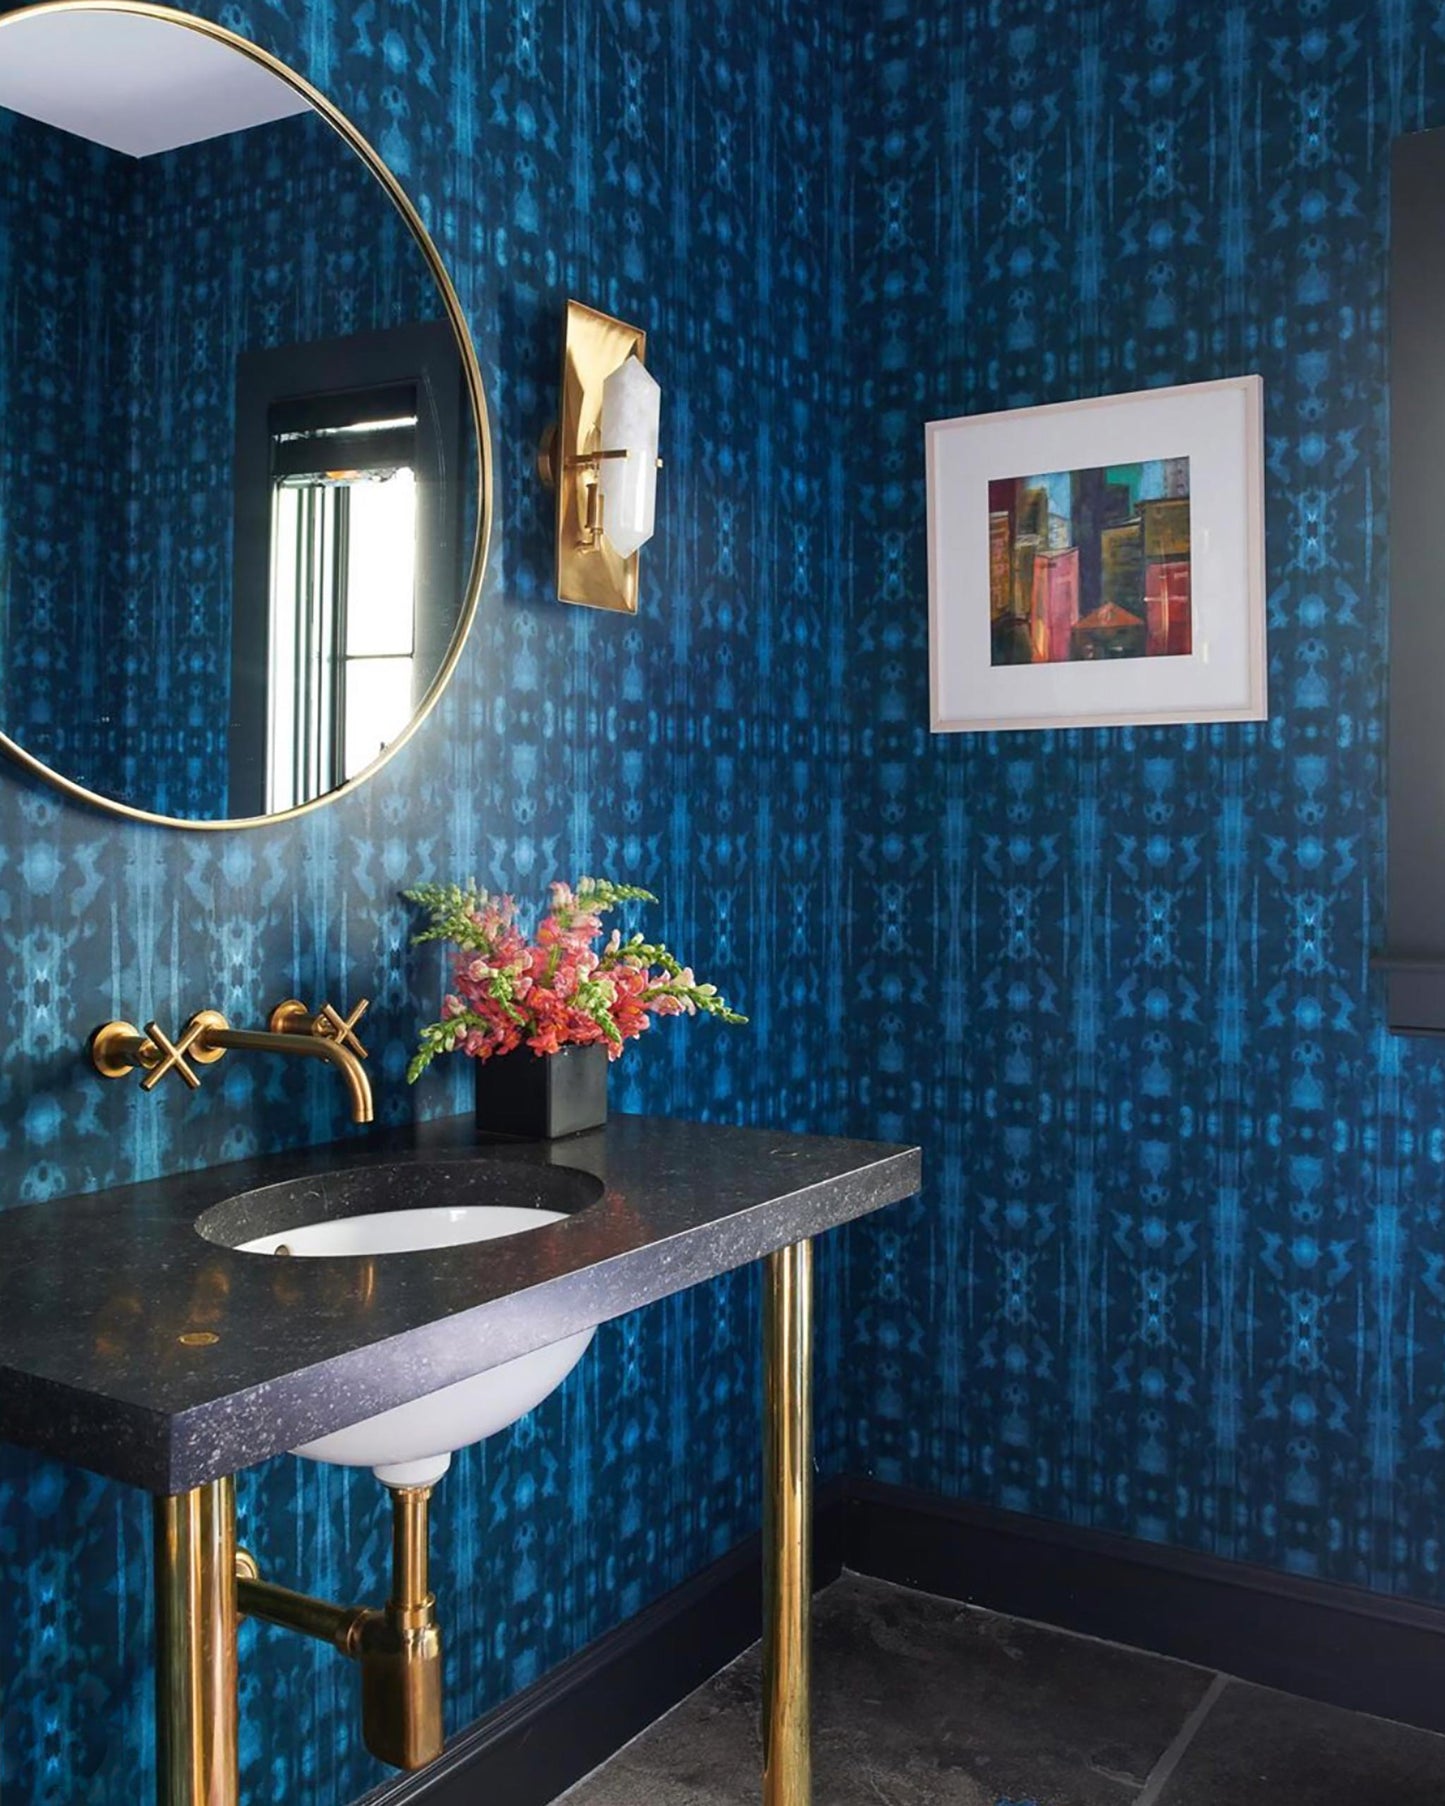 A bathroom with luxury Biami Wallpaper Night featuring a Biami pattern and a high-end fabric gold mirror